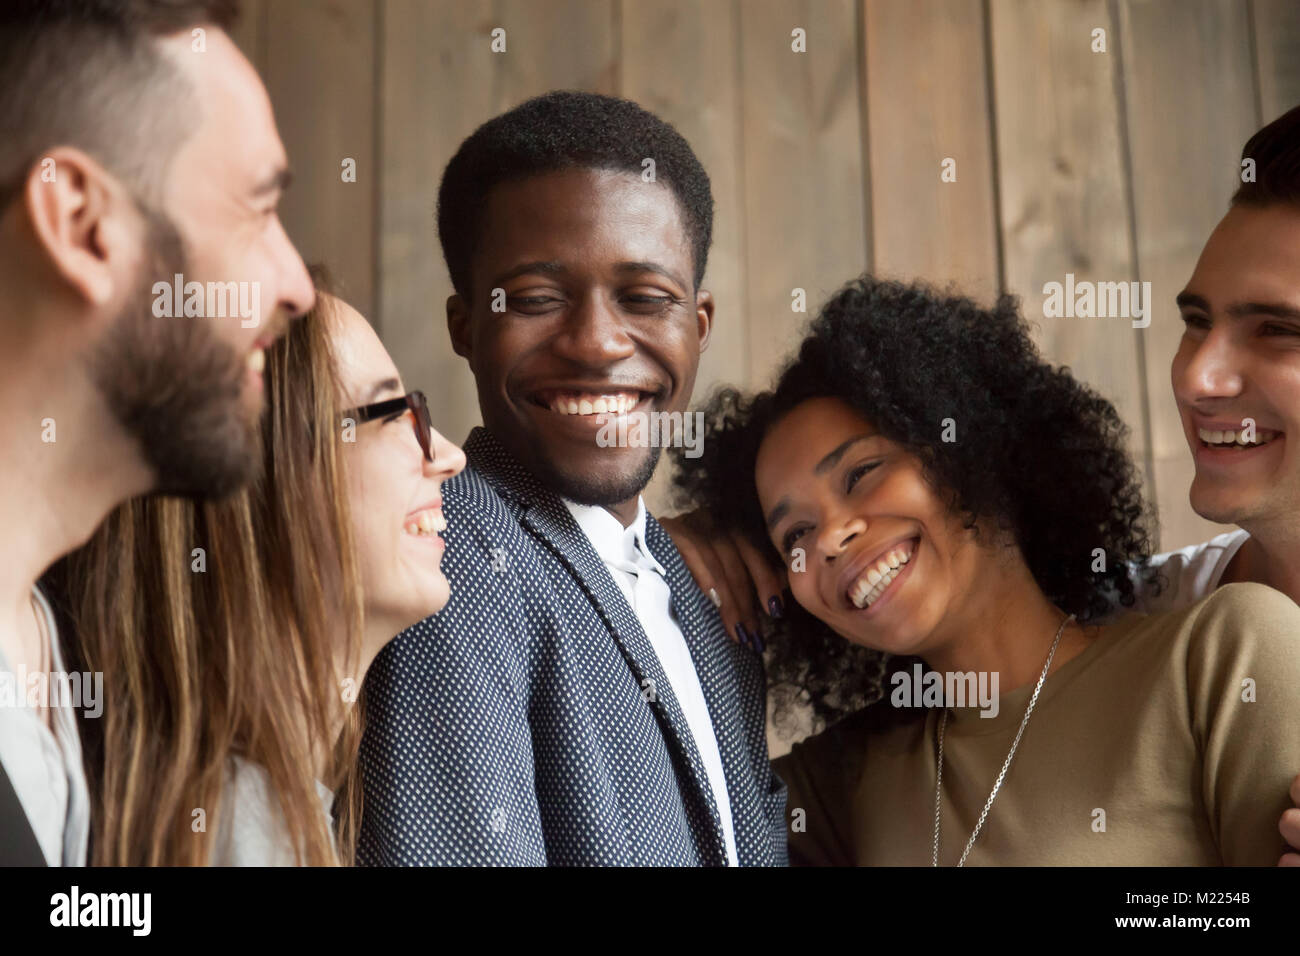 Happy diverse black and white people group smiling bonding toget Stock Photo